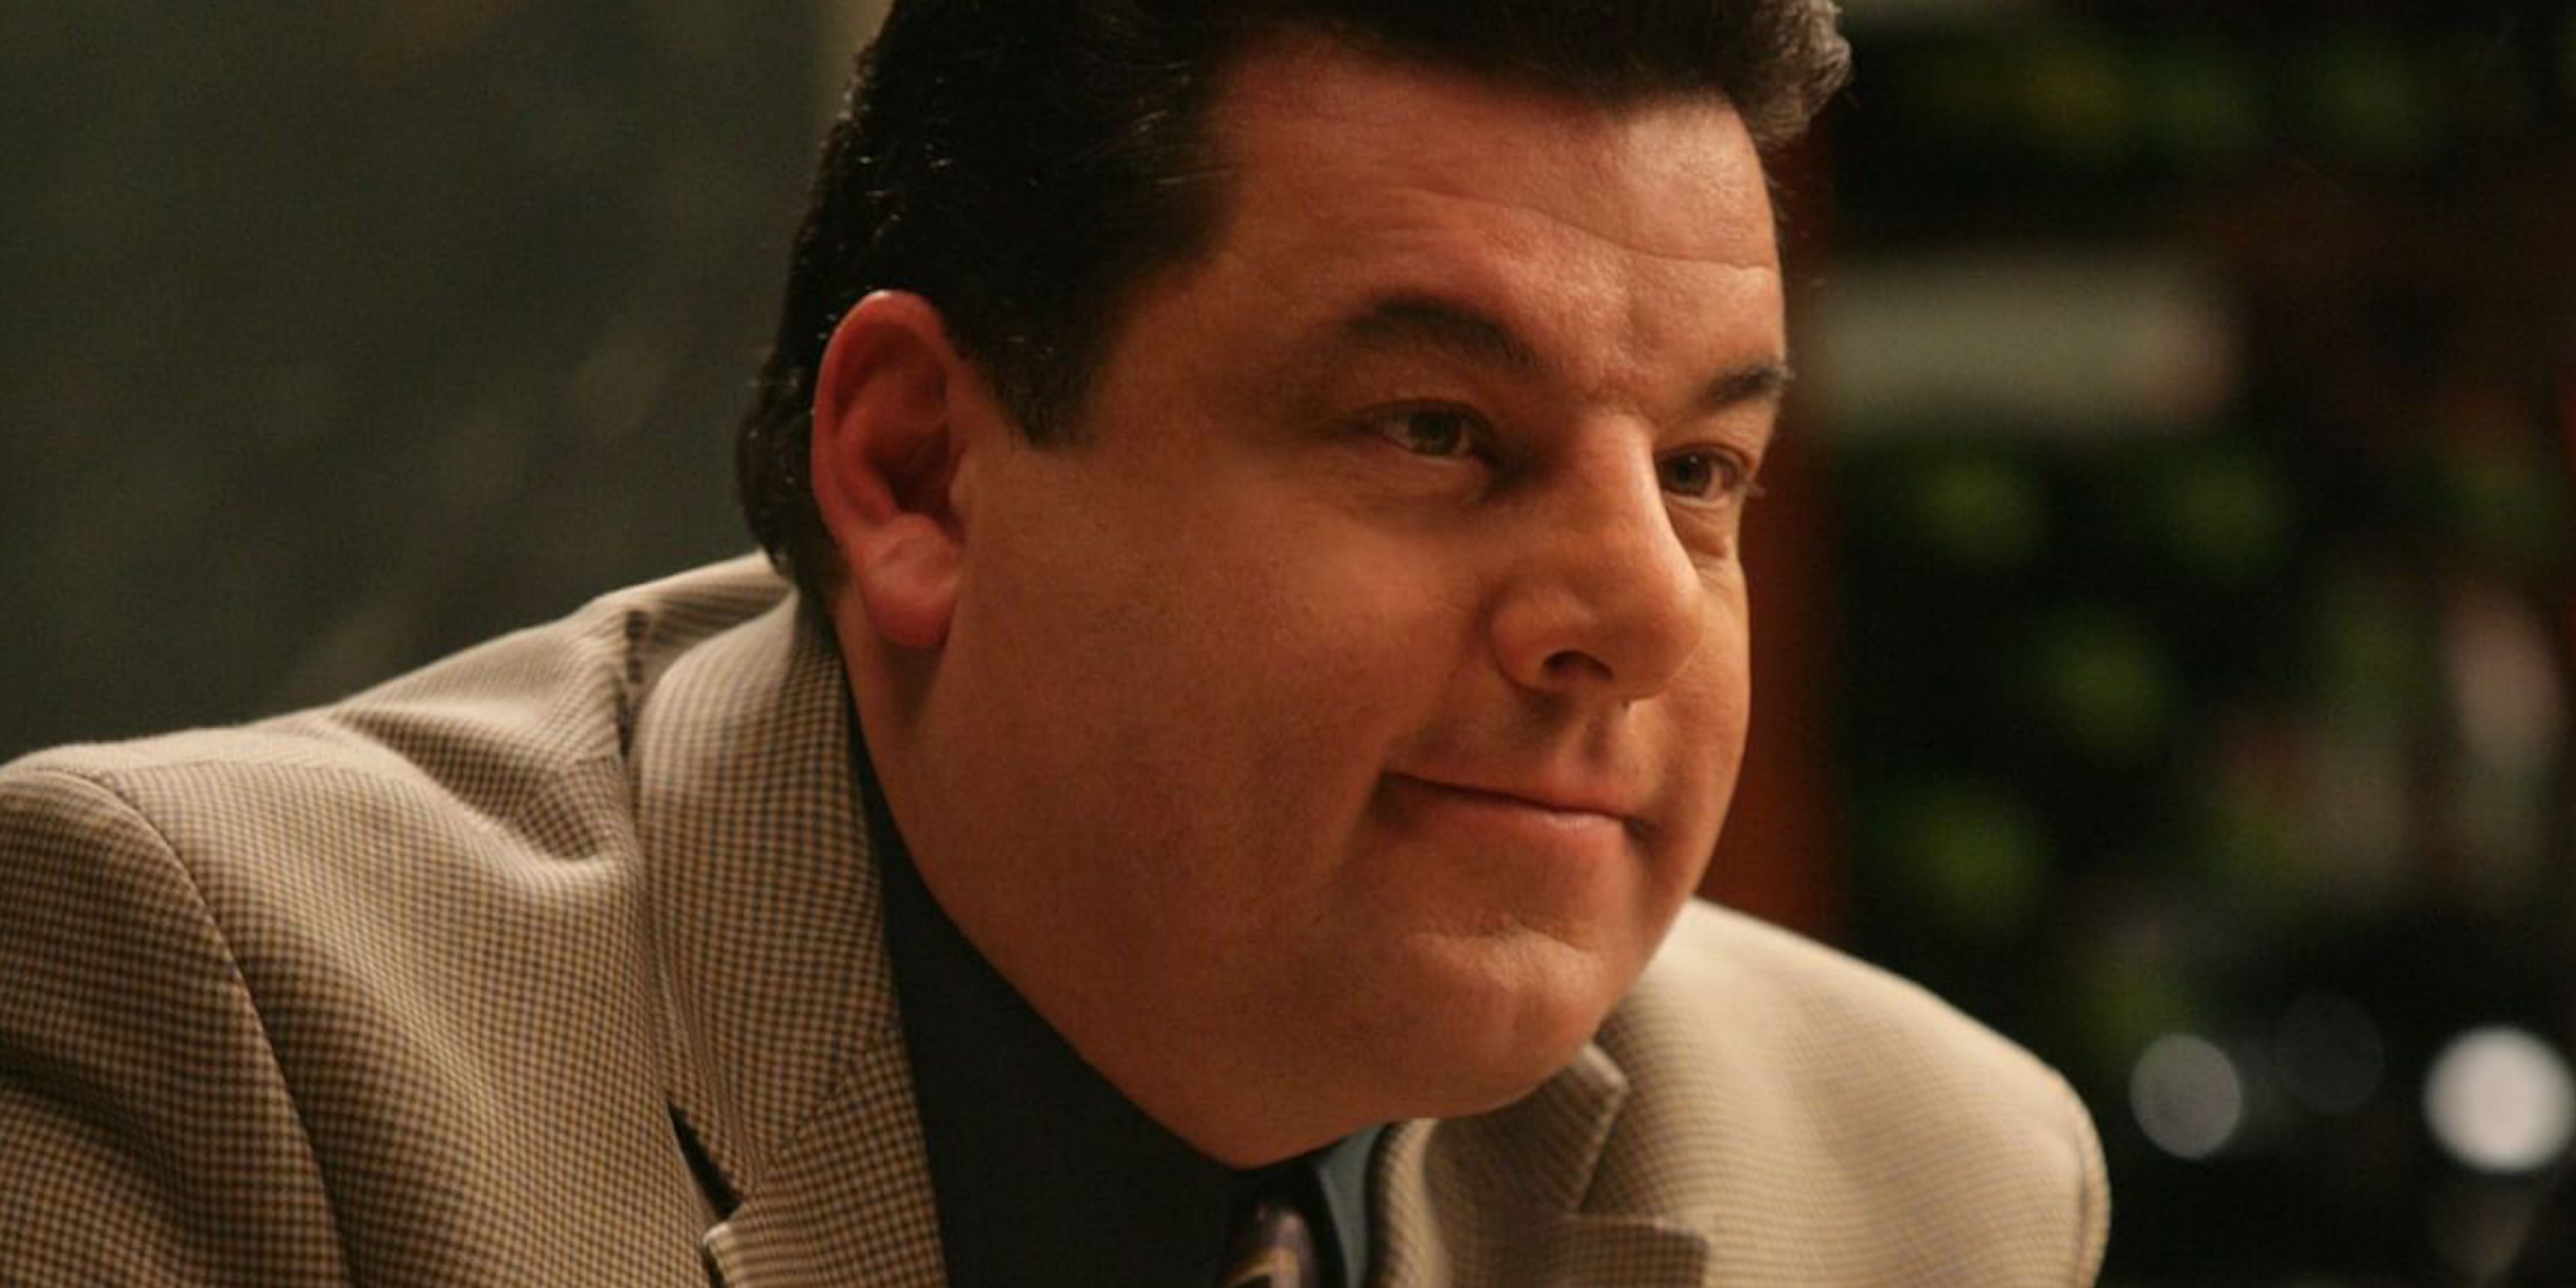 Steven R. Schirripa looking serious as Bobby Bacala in The Sopranos on HBO